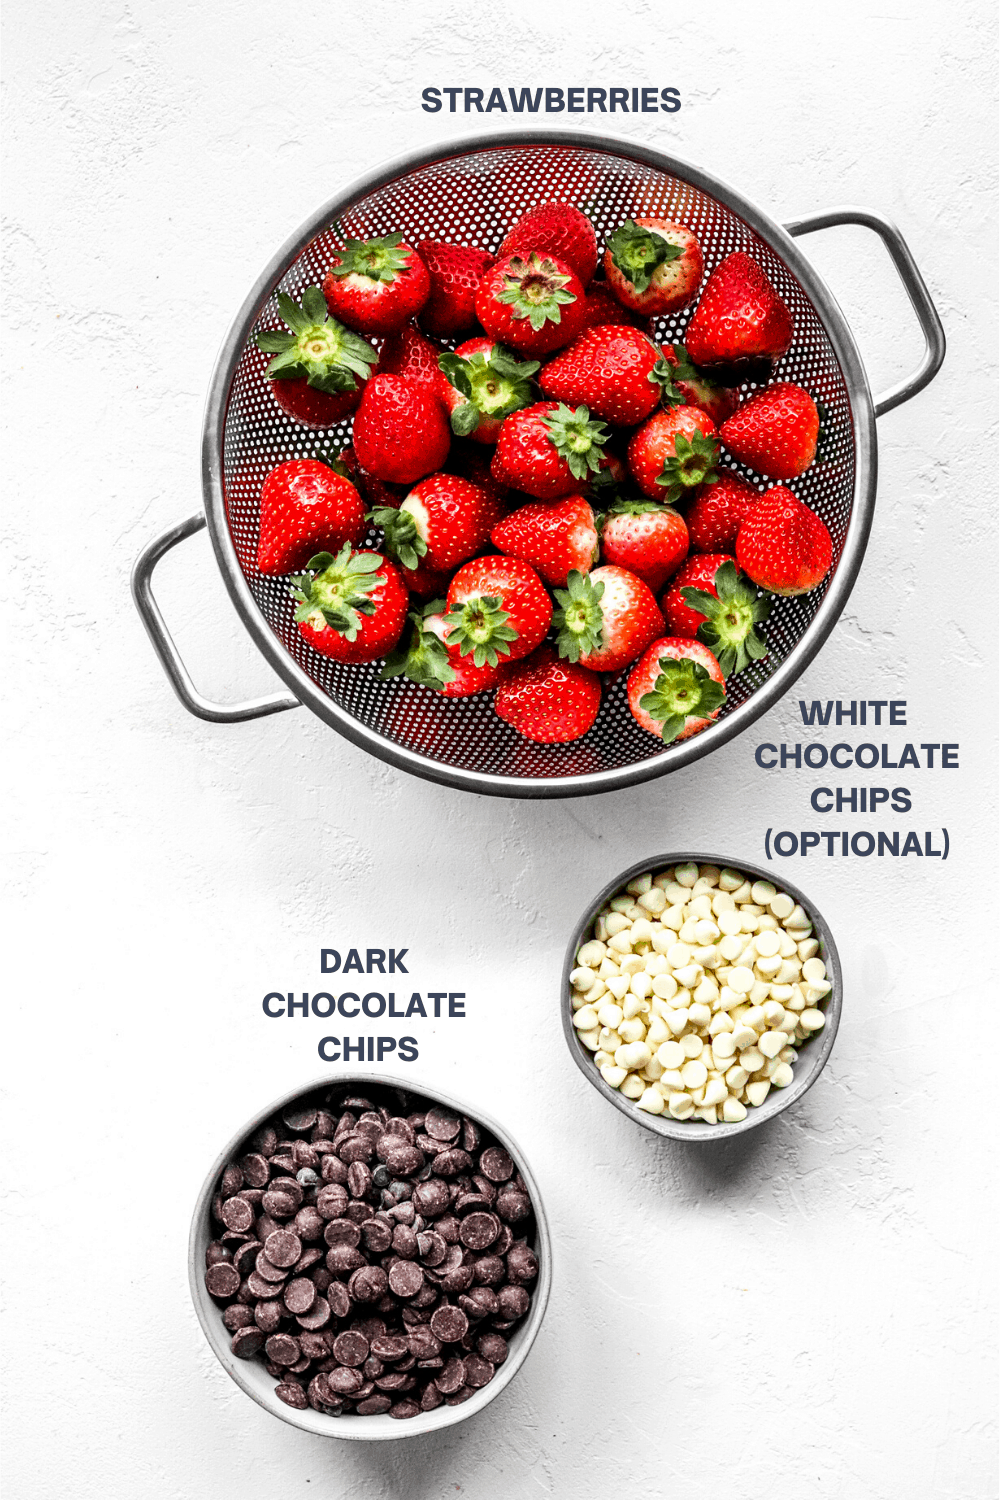 Ingredients for chocolate covered strawberries with labels over each ingredient. 